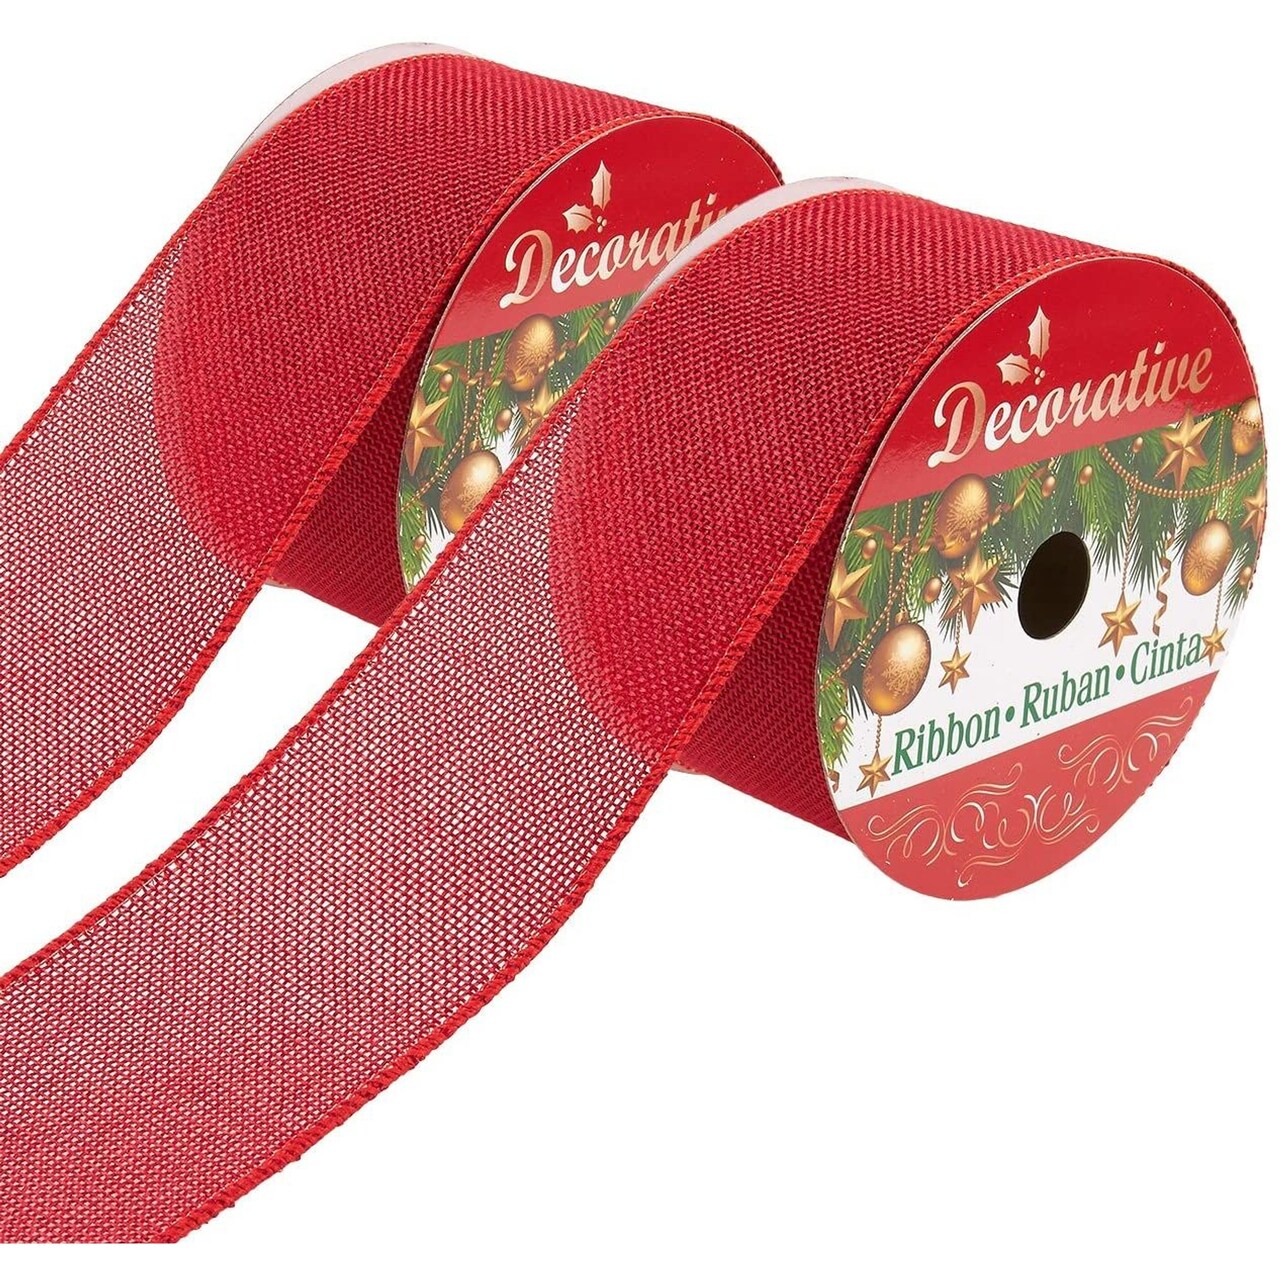 Red Burlap Ribbons for Crafts, Christmas Holiday Decor (30 Feet, 2 Pack)